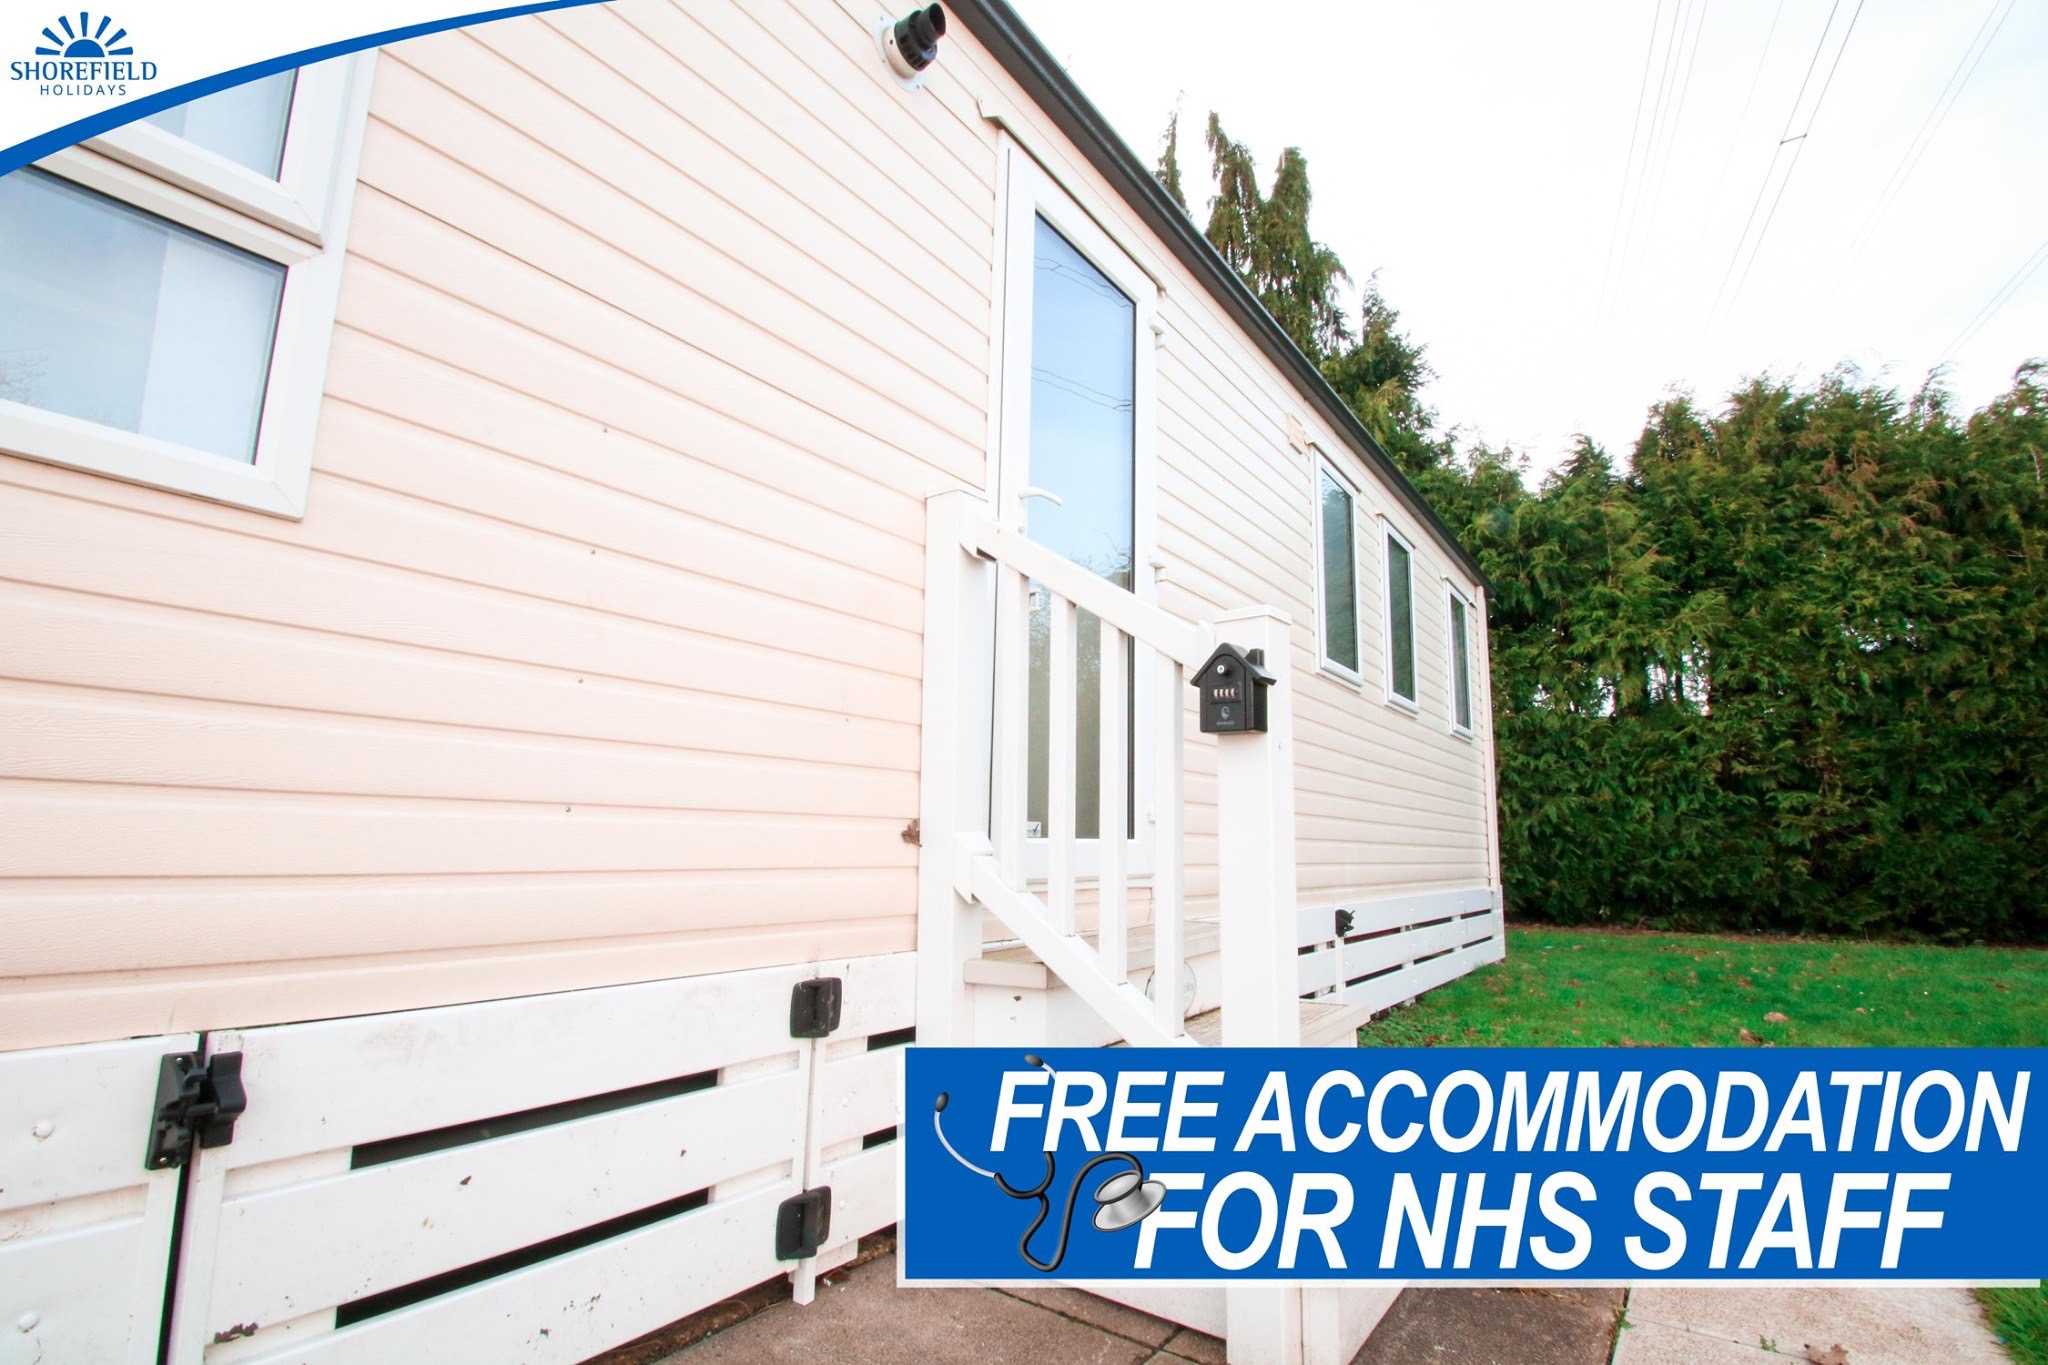 Free accommodation for NHS Staff